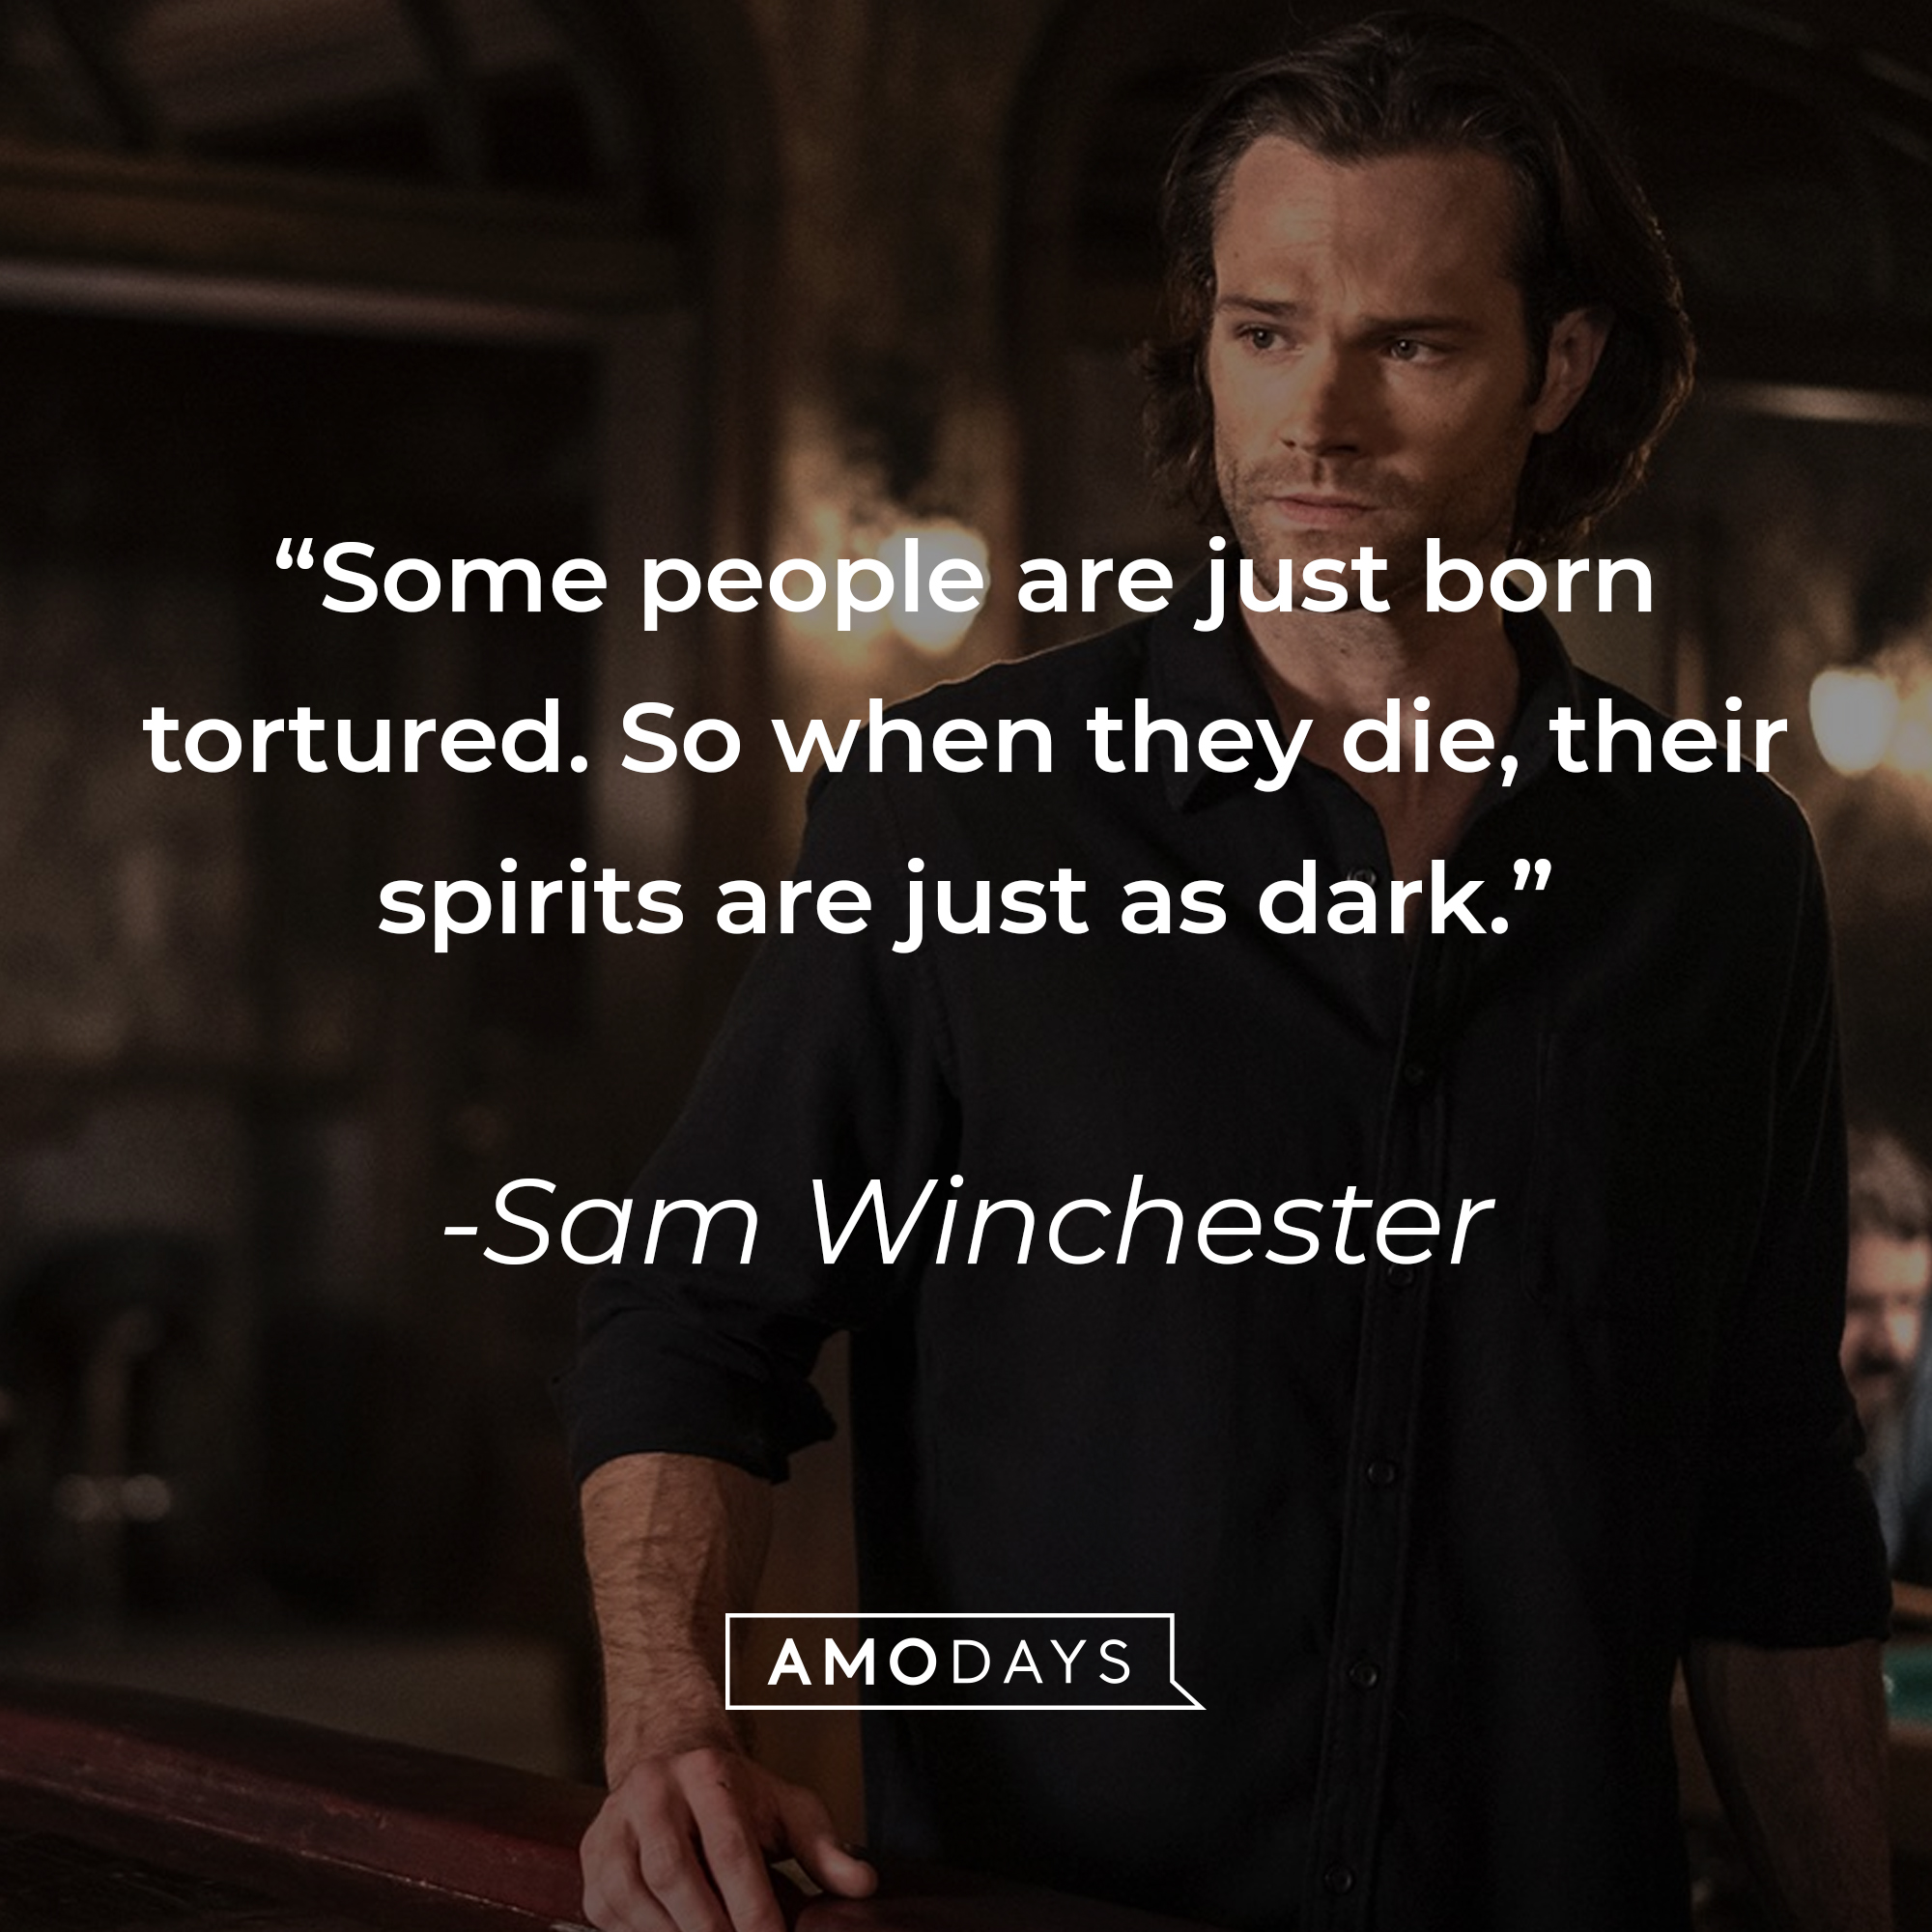 Sam Winchester's quote: "Some people are just born tortured. So when they die, their spirits are just as dark." | Source: Facebook.com/Supernatural